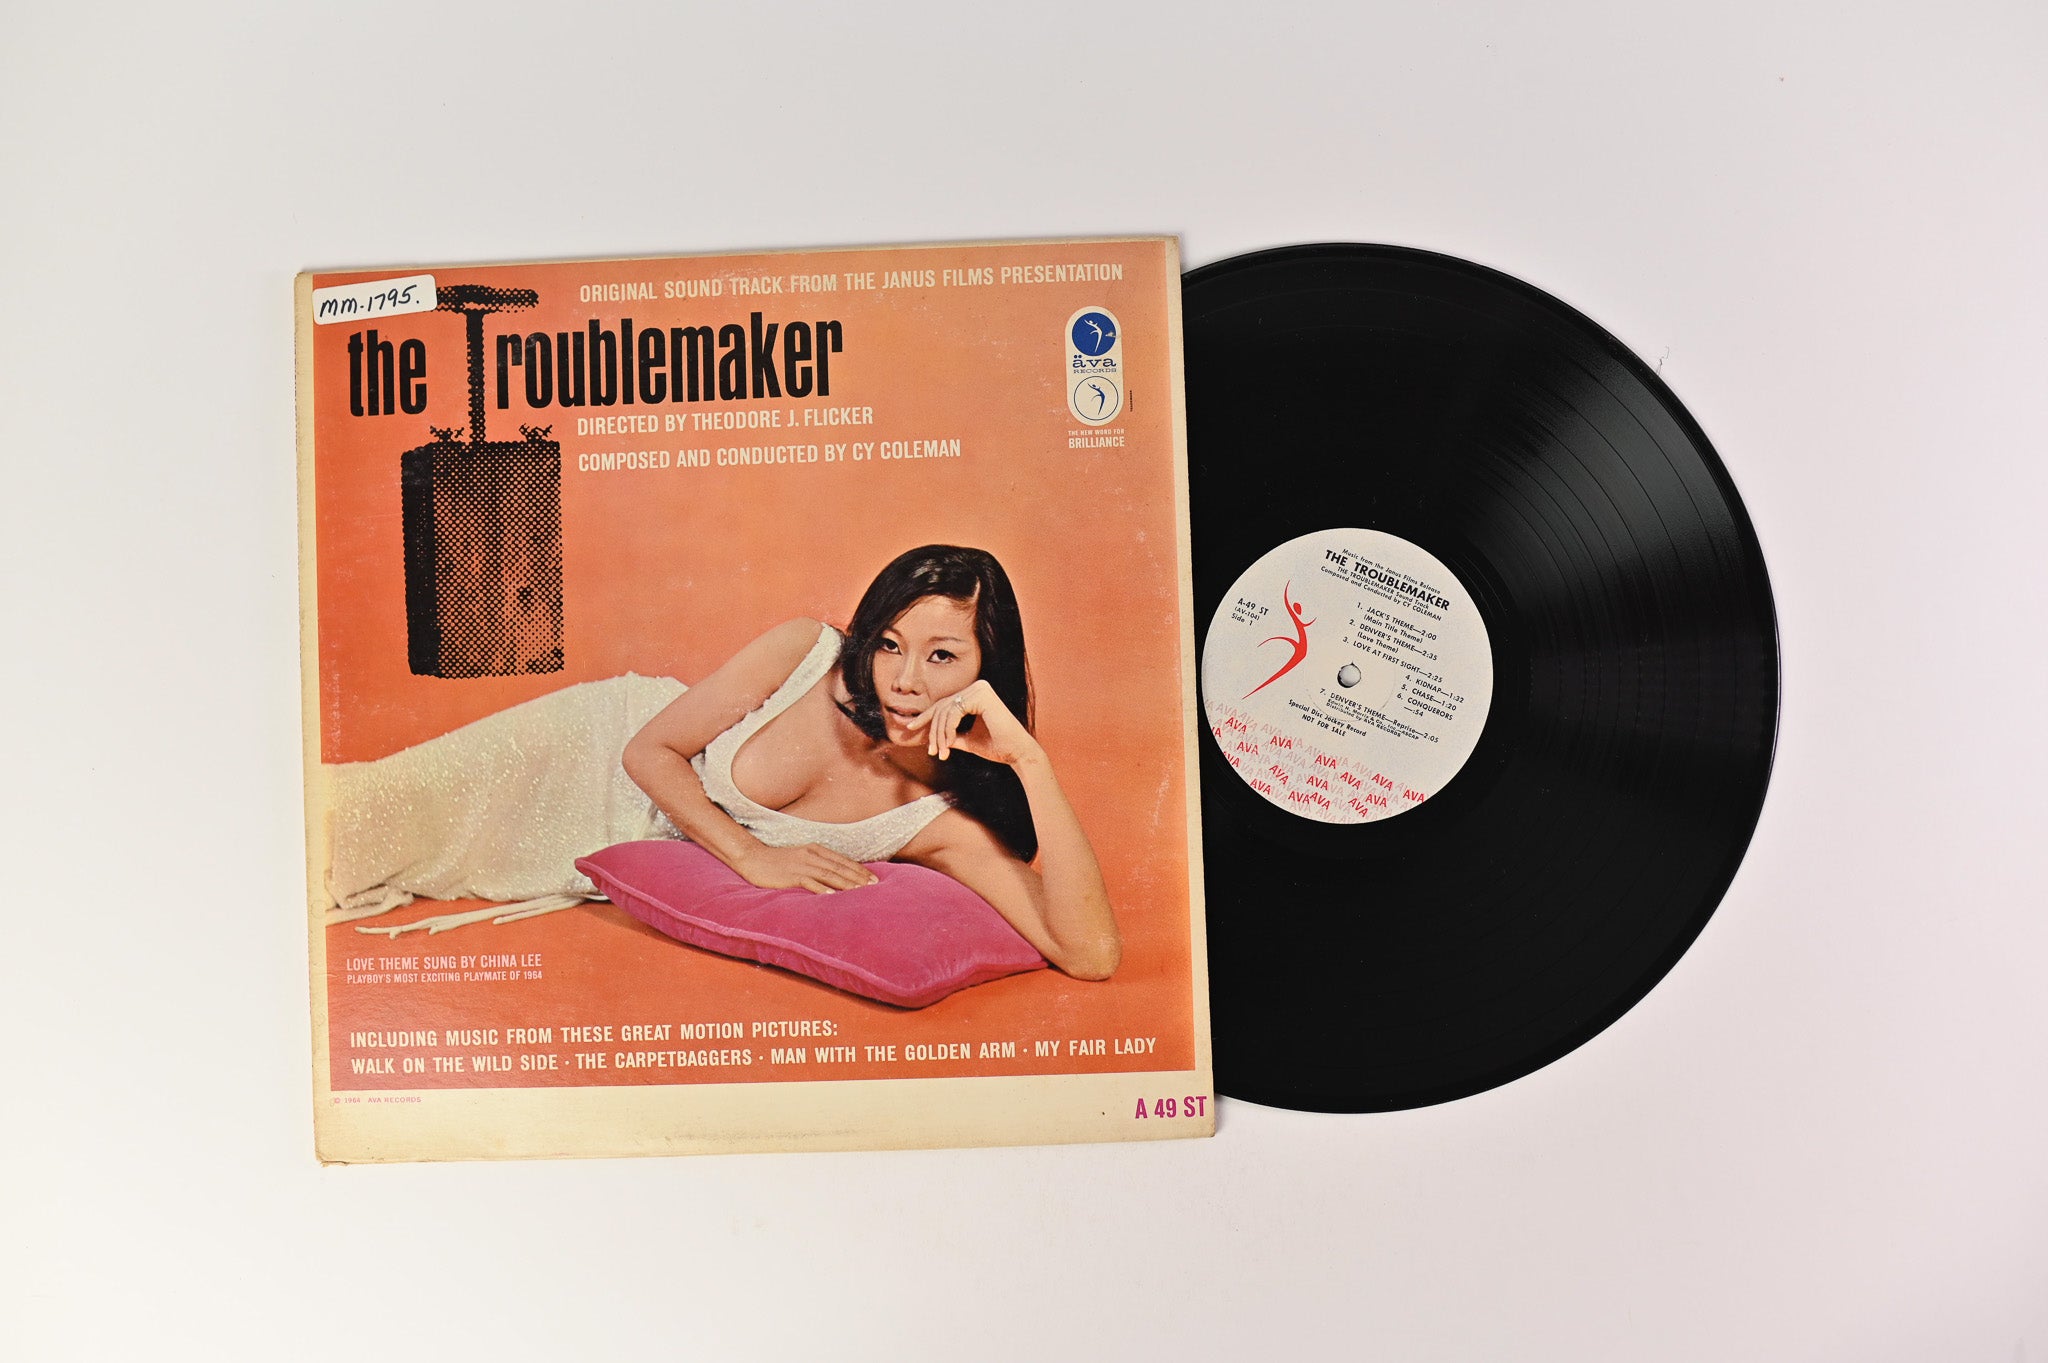 Cy Coleman - The Troublemaker (Original Sound Track From The Janus Films Presentation) on Ava Records